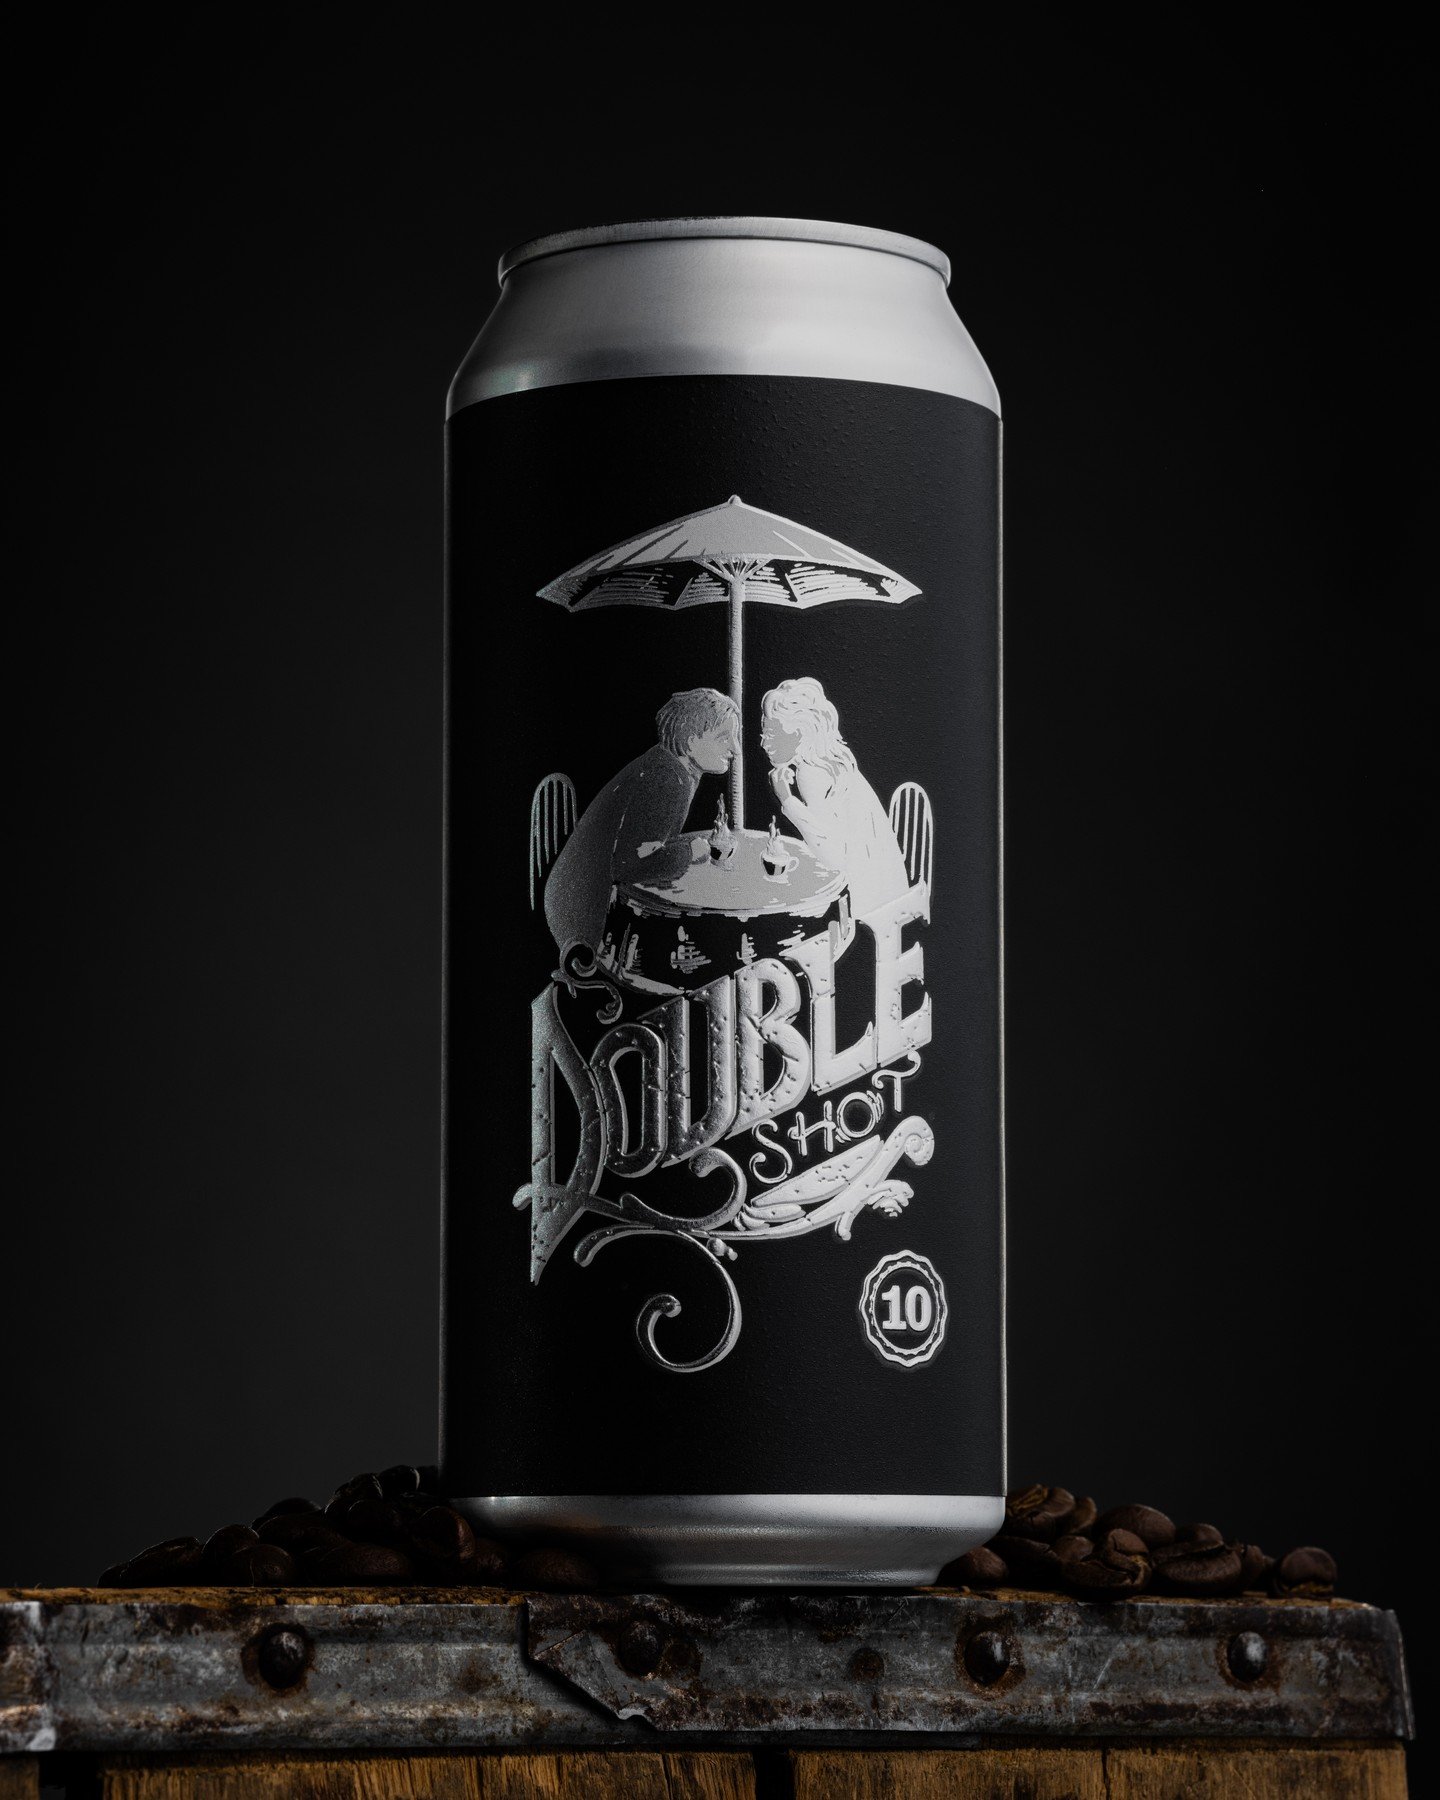 It would be impossible to overstate the importance of Double Shot to Tree House. 

Originally devised alongside Juice Machine in 2014 for the Extreme Beer Fest, it has been brewed hundreds of times since with dozens of iterations. 

In addition to be